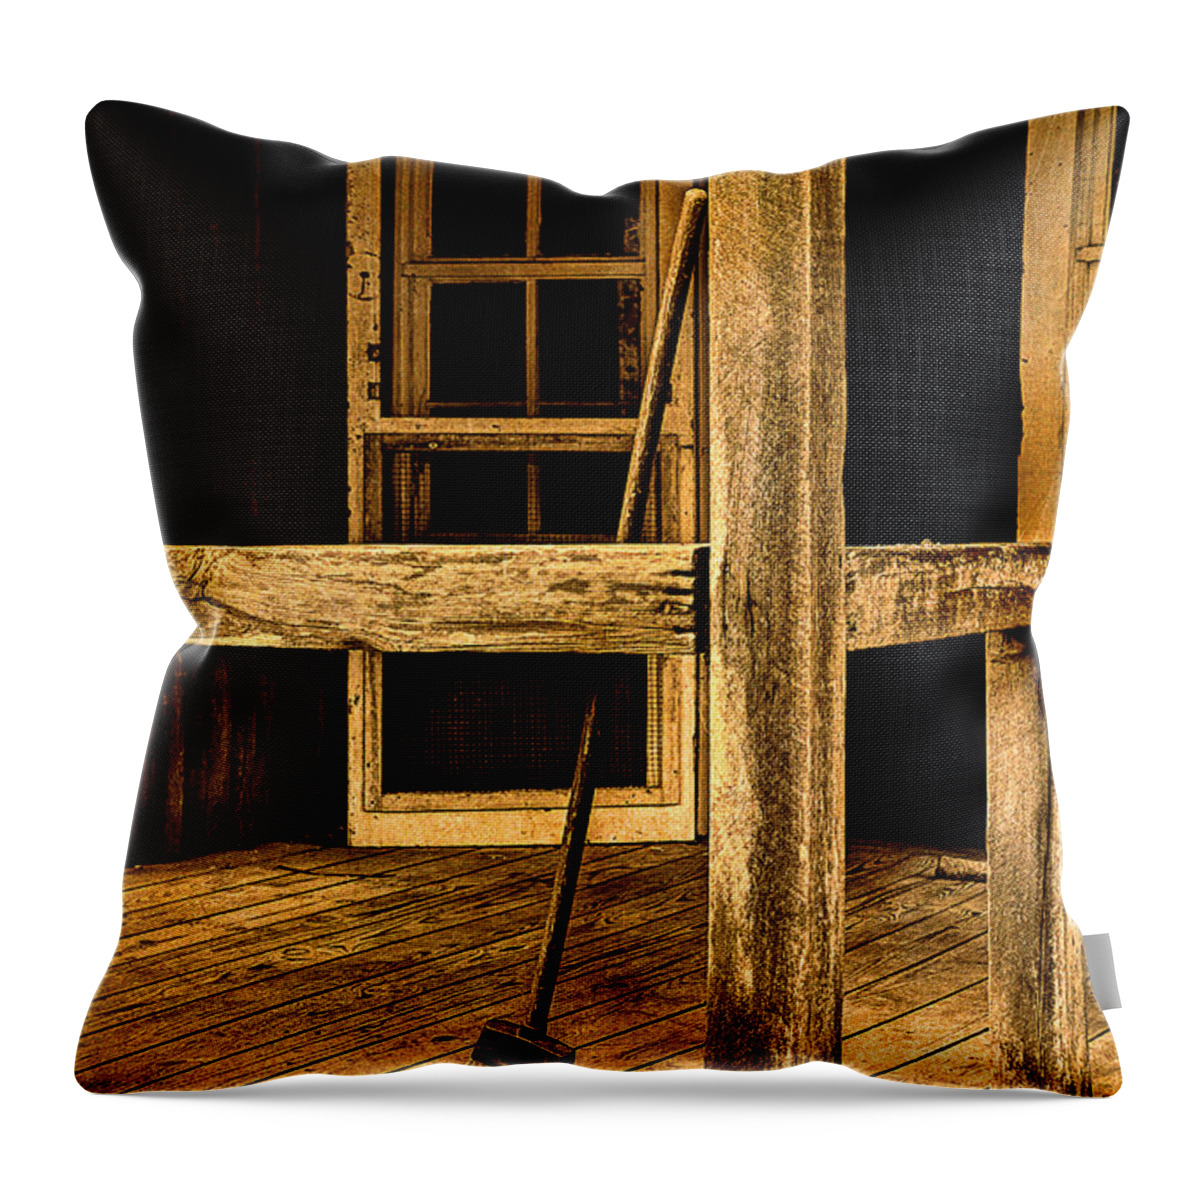 Abandoned Home Throw Pillow featuring the photograph Looking Into A Faded Memory by Michael Eingle